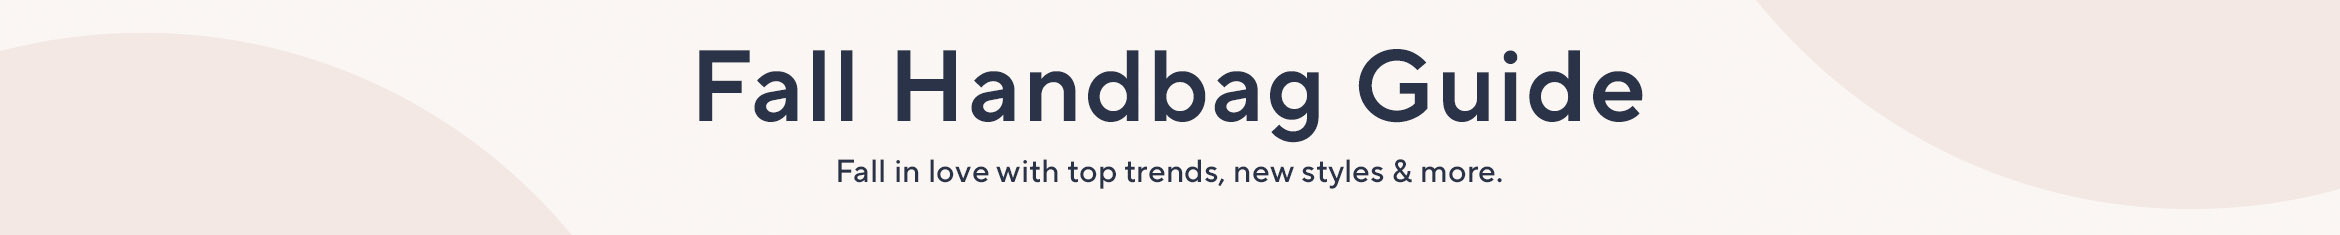 Fall Handbag Guide.  Fall in love with top trends, new styles & more.